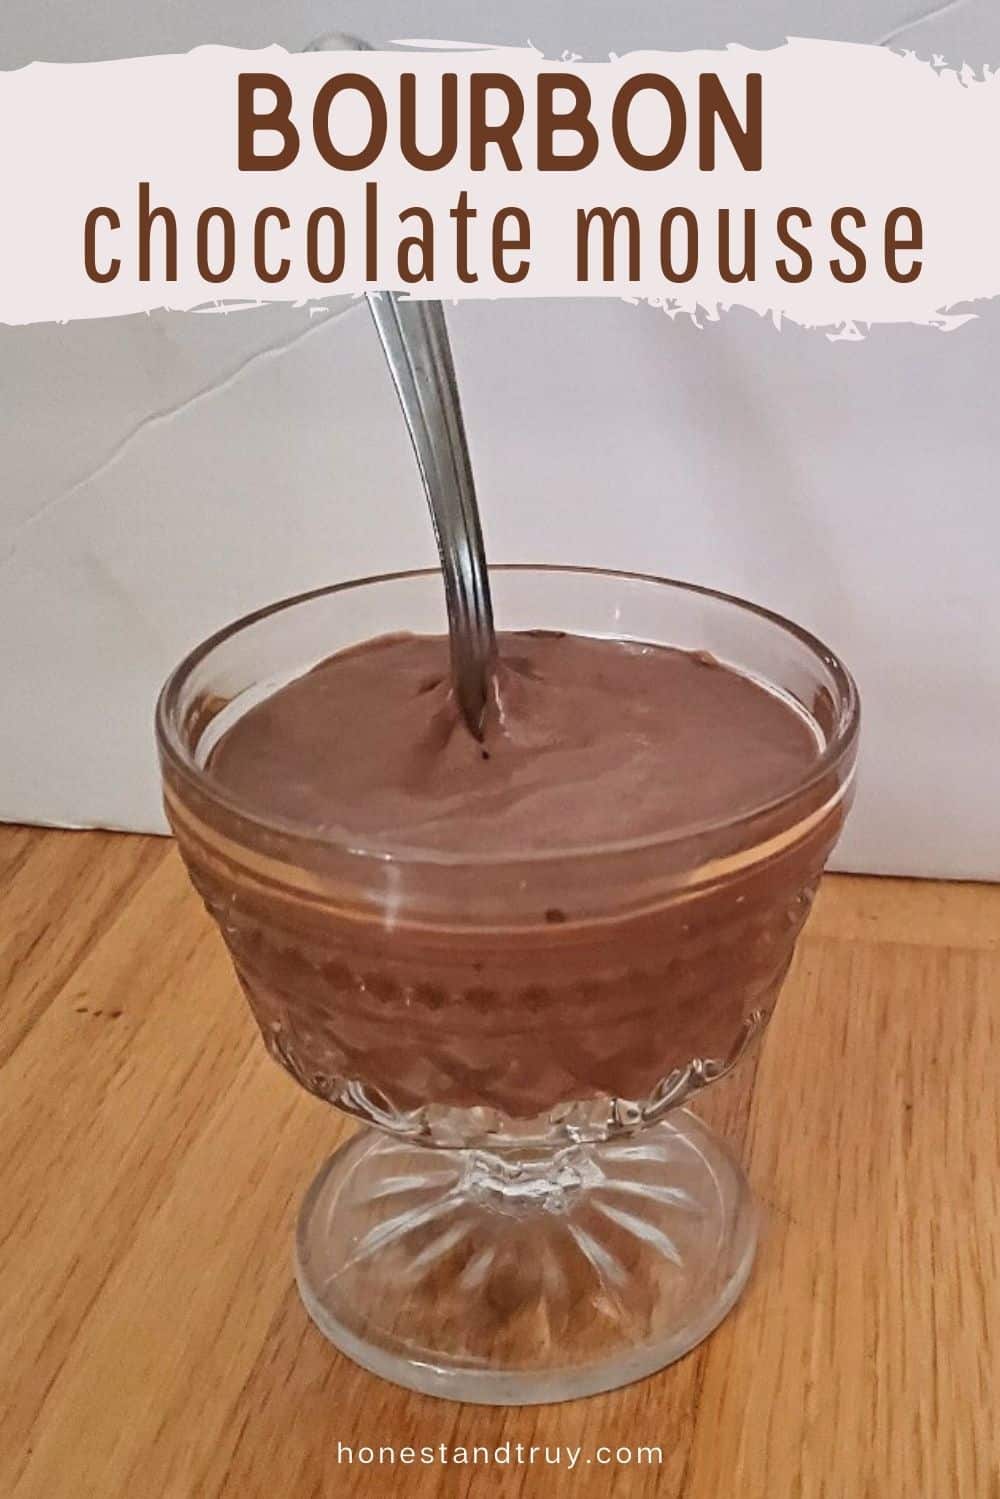 Bourbon chocolate mousse with a spoon in the dish.